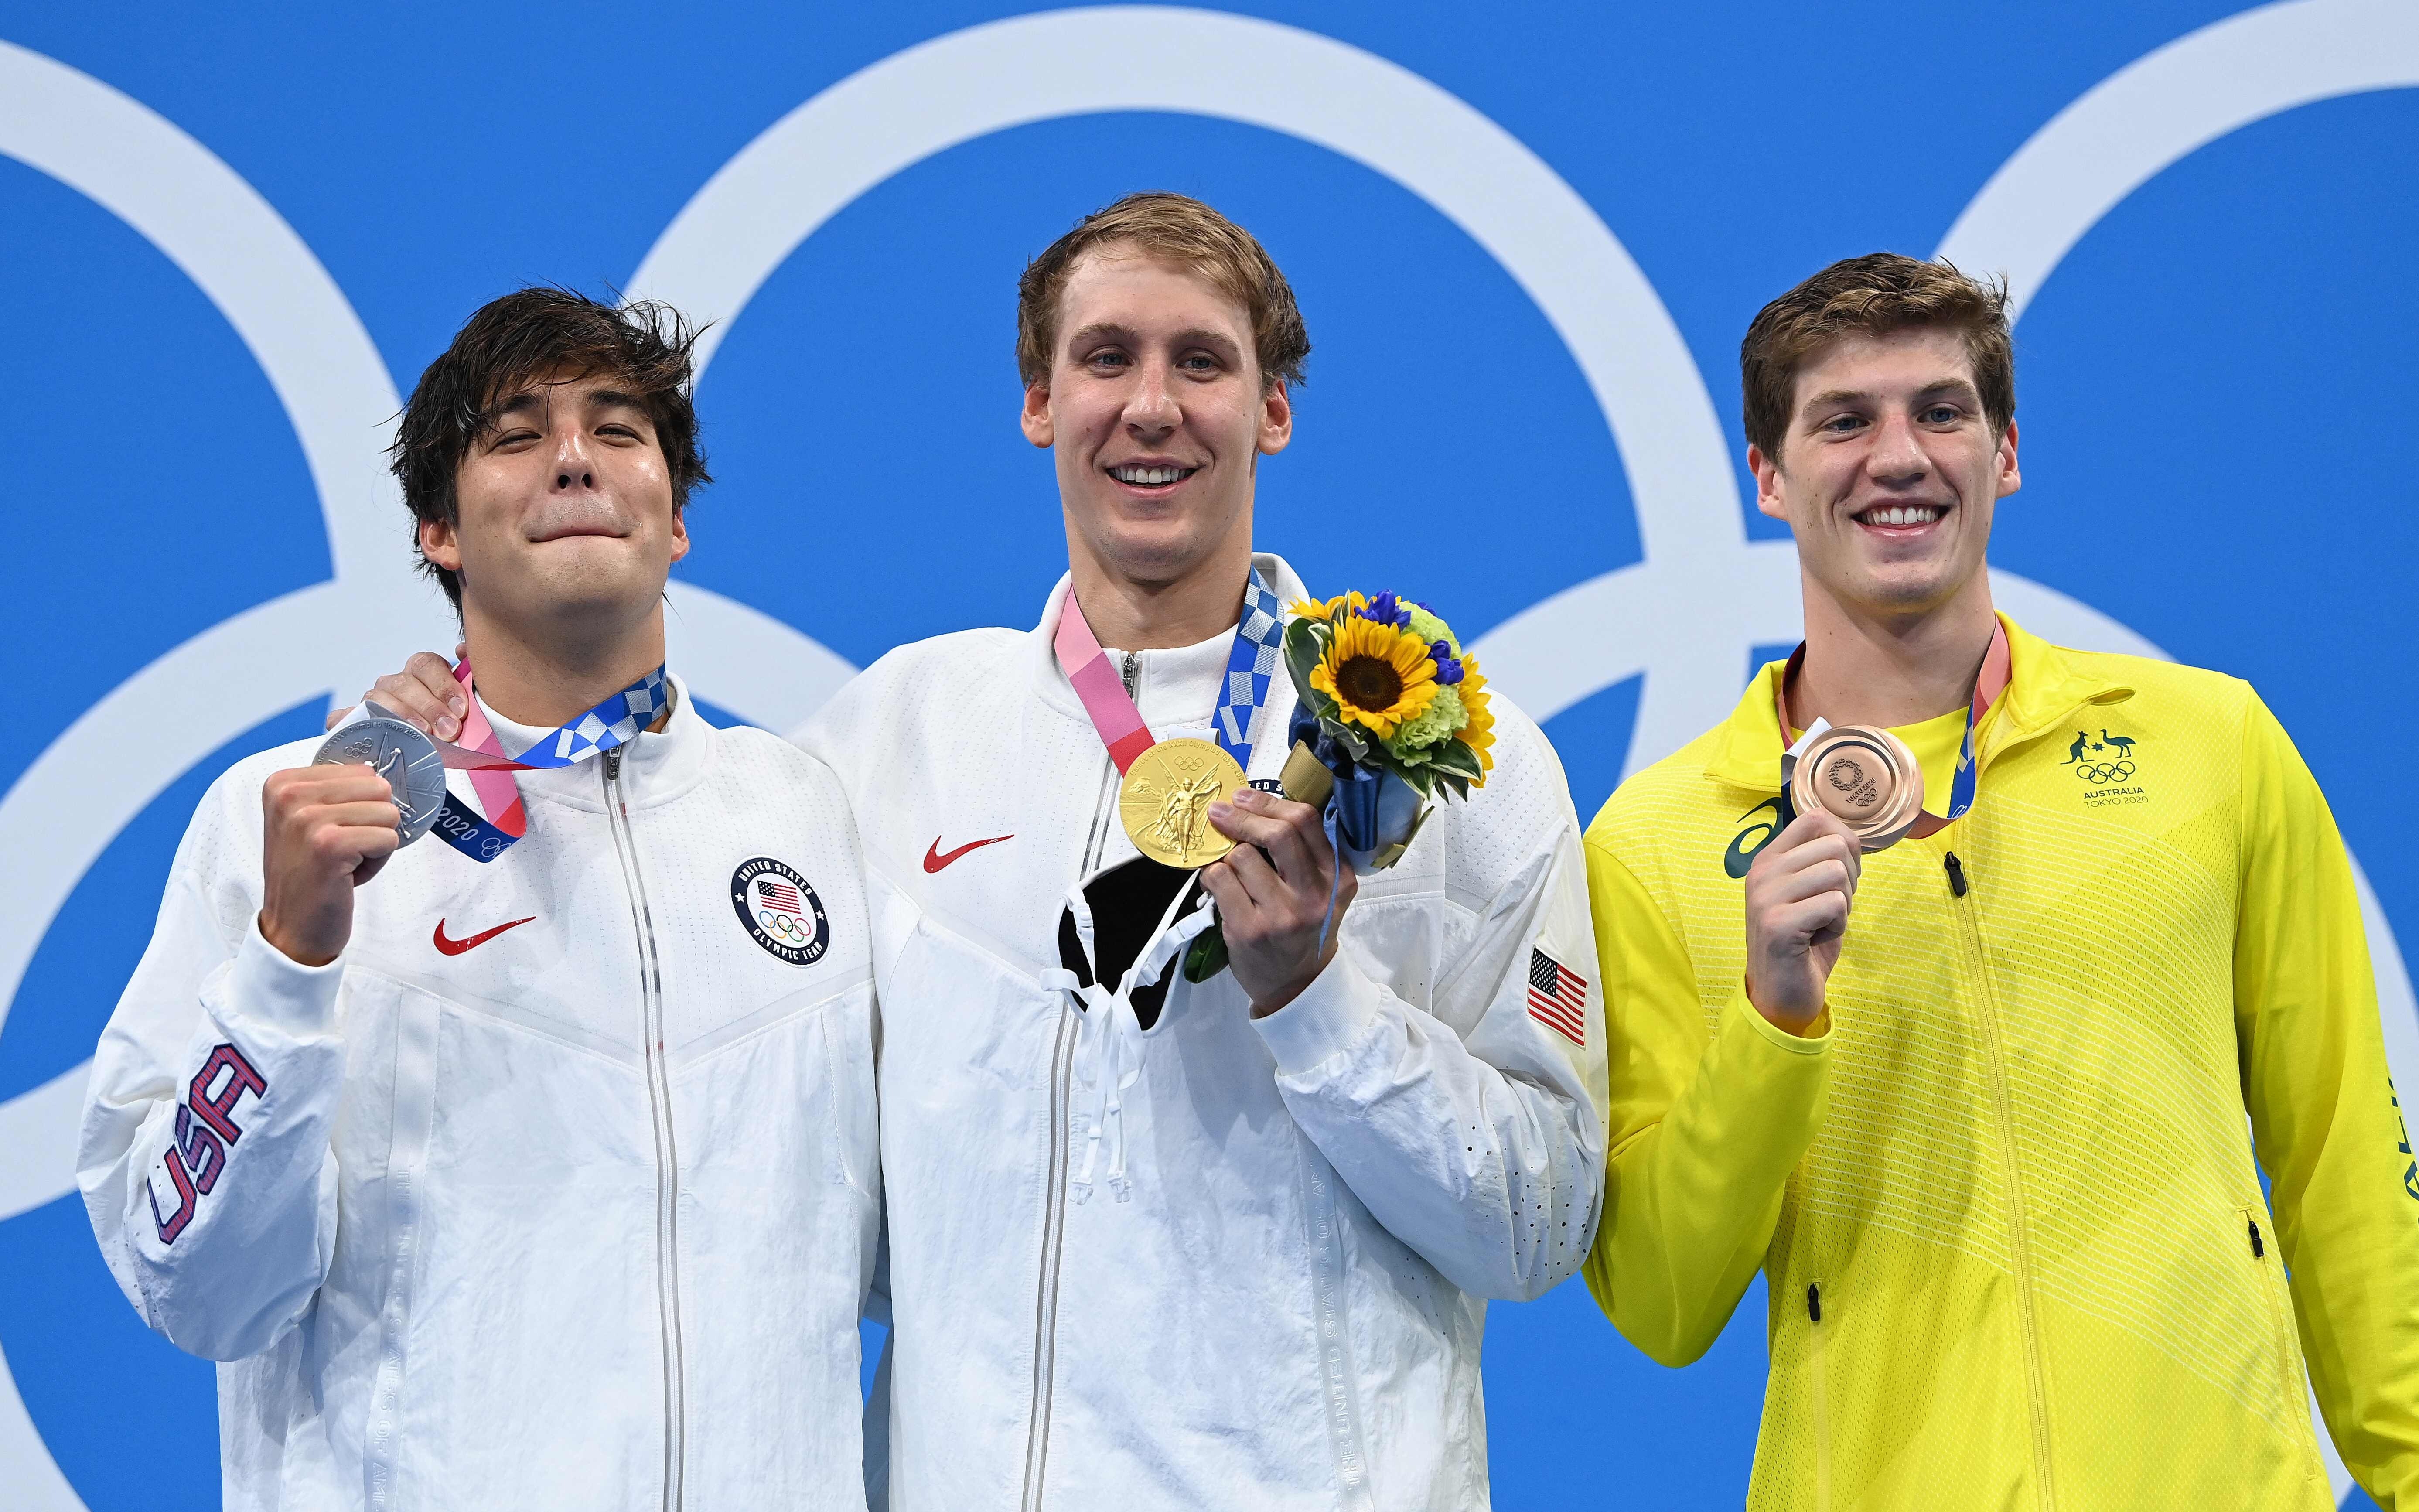 Silver medallist Jay Litherland, gold medallist Chase Kalisz (both from the US) and bronze medallist Brendon Smith from Australia pose maskless with their medals after the final of the men's 400m individual medley swimming event. Photo: AFP